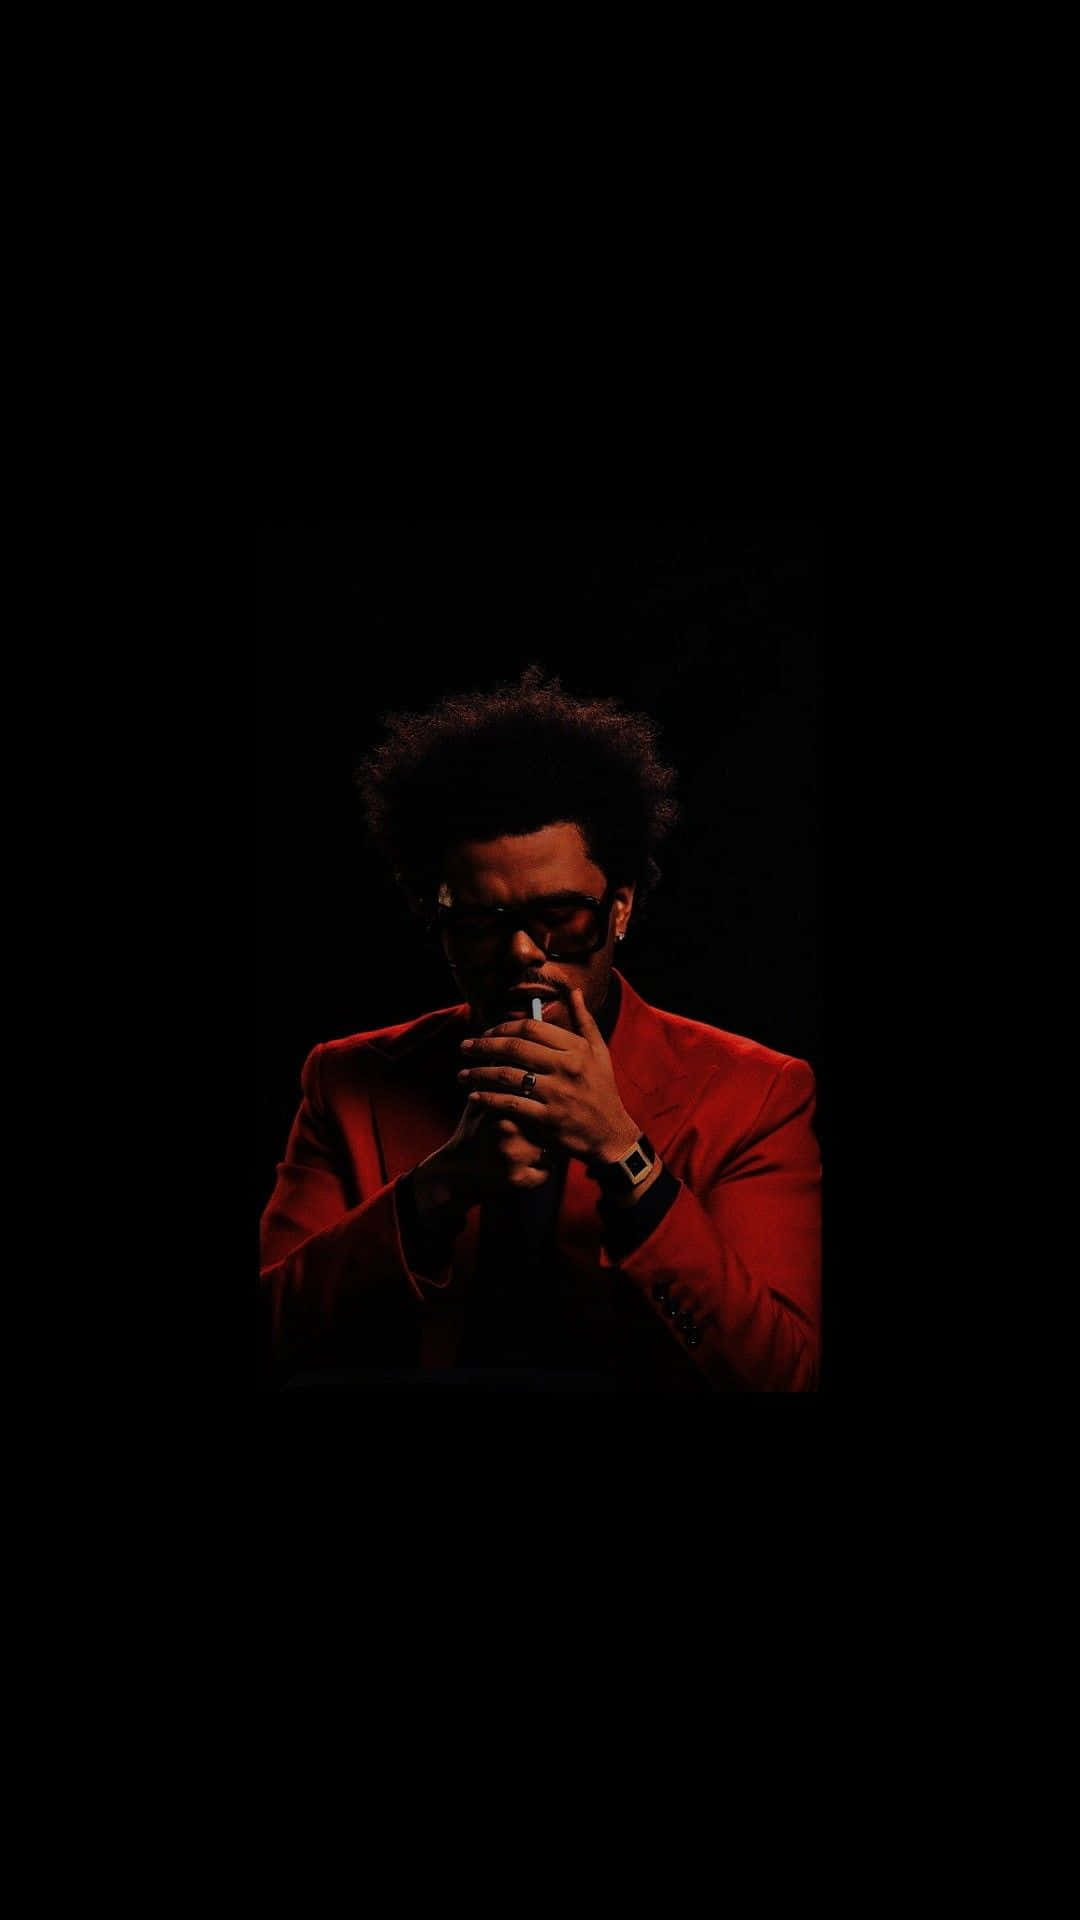 After Hours Wallpaper  The weeknd poster The weeknd The weeknd wallpaper  iphone